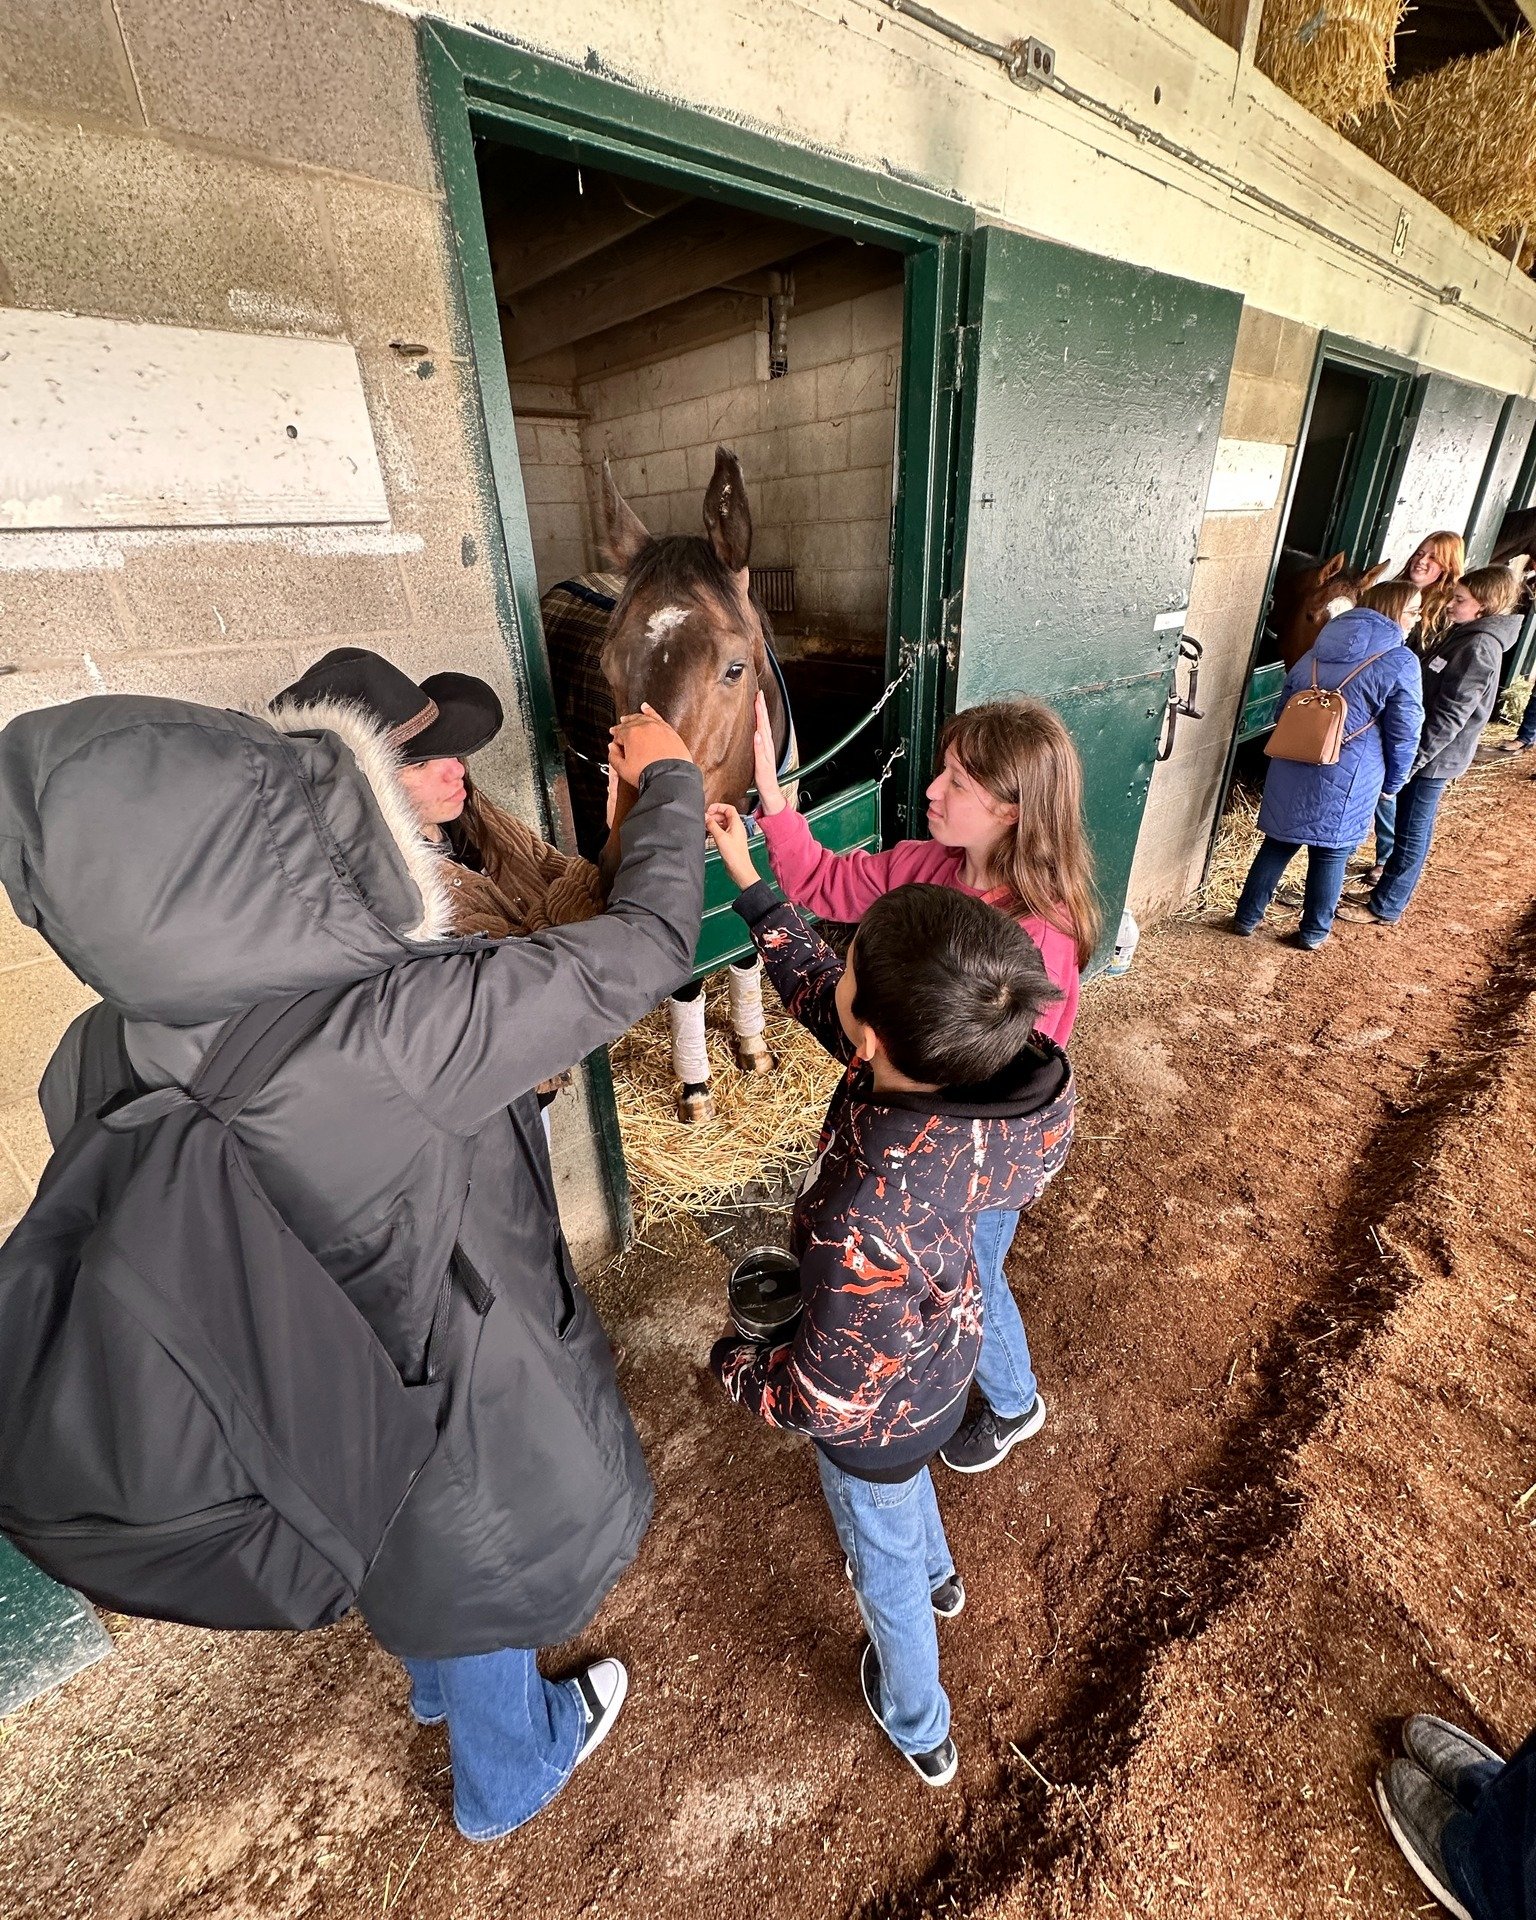 It was a great start to the @Keeneland meet on Friday when Amplify kicked off the month hosting &quot;Spring Break with Amplify Horse Racing!&quot; 

Our day started at @winstarfarm's training center, where our group watched some of the WinStar resid